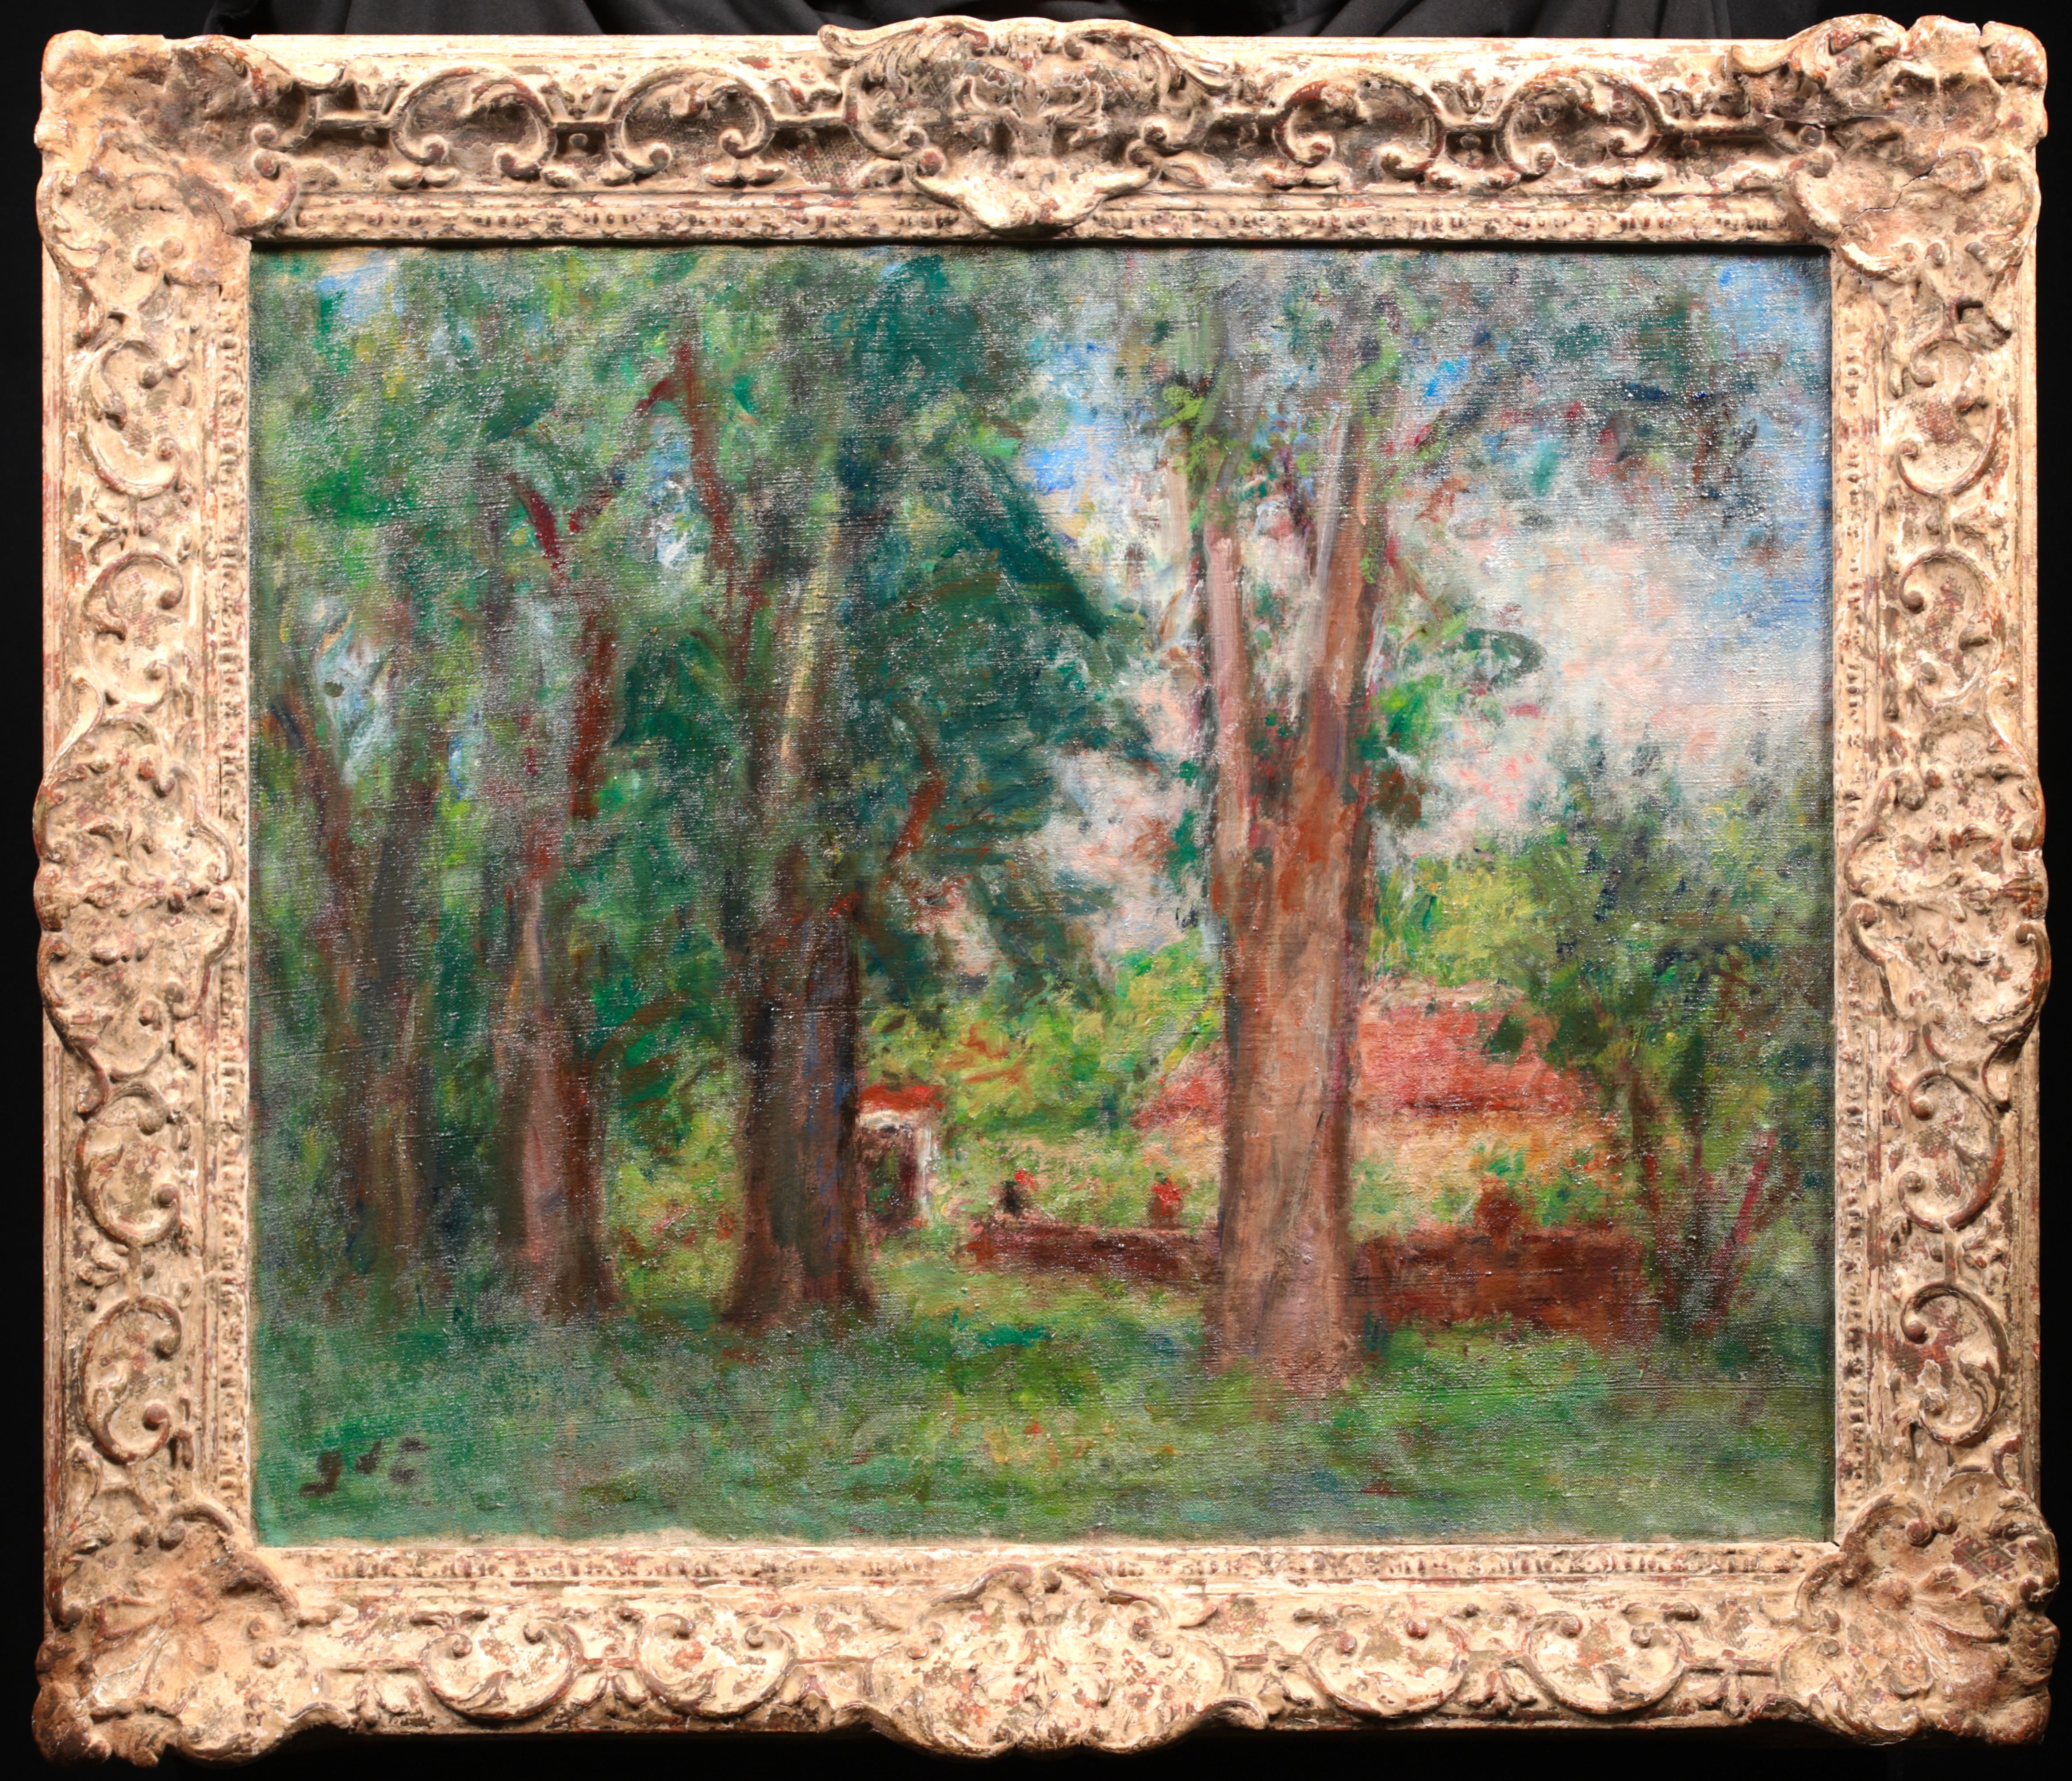 Signed post impressionist oil circa 1930 by popular French painter Georges D'Espagnat. The piece depicts tall trees, with a low brick wall leading to a garden beyond. There are figures standing at the wall. The trees branches are bustling with green